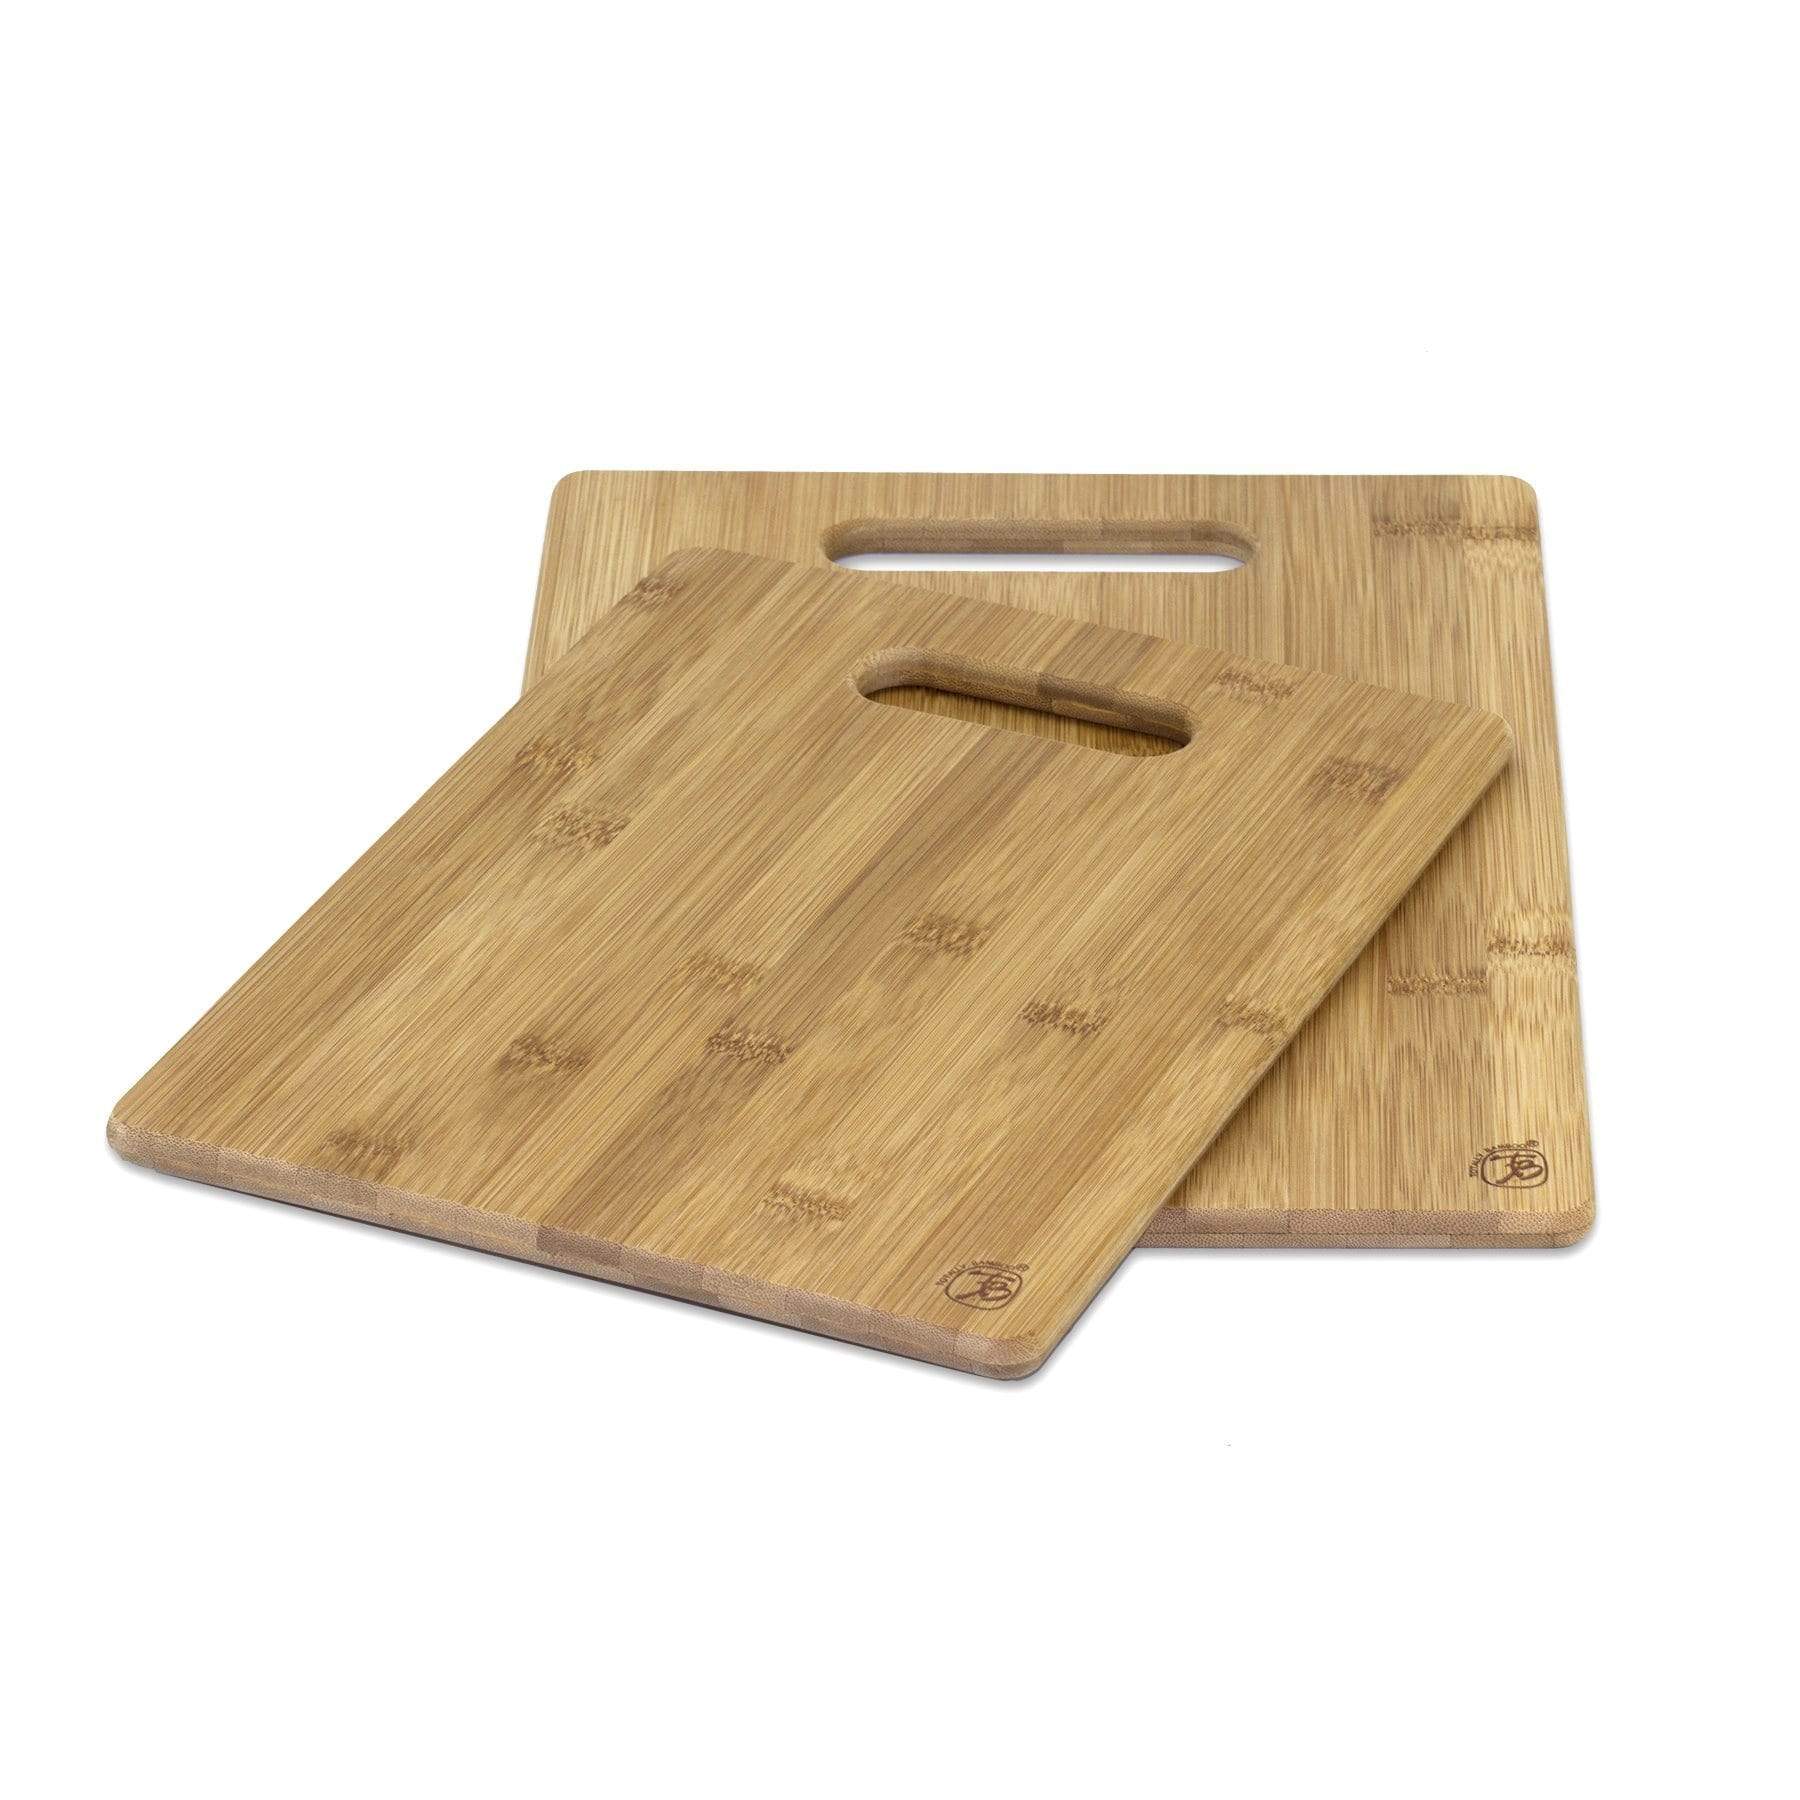 Totally Bamboo Two-Piece Bamboo Cutting Board Set, 13" x 9-1/2" and 11" x 8-1/2"